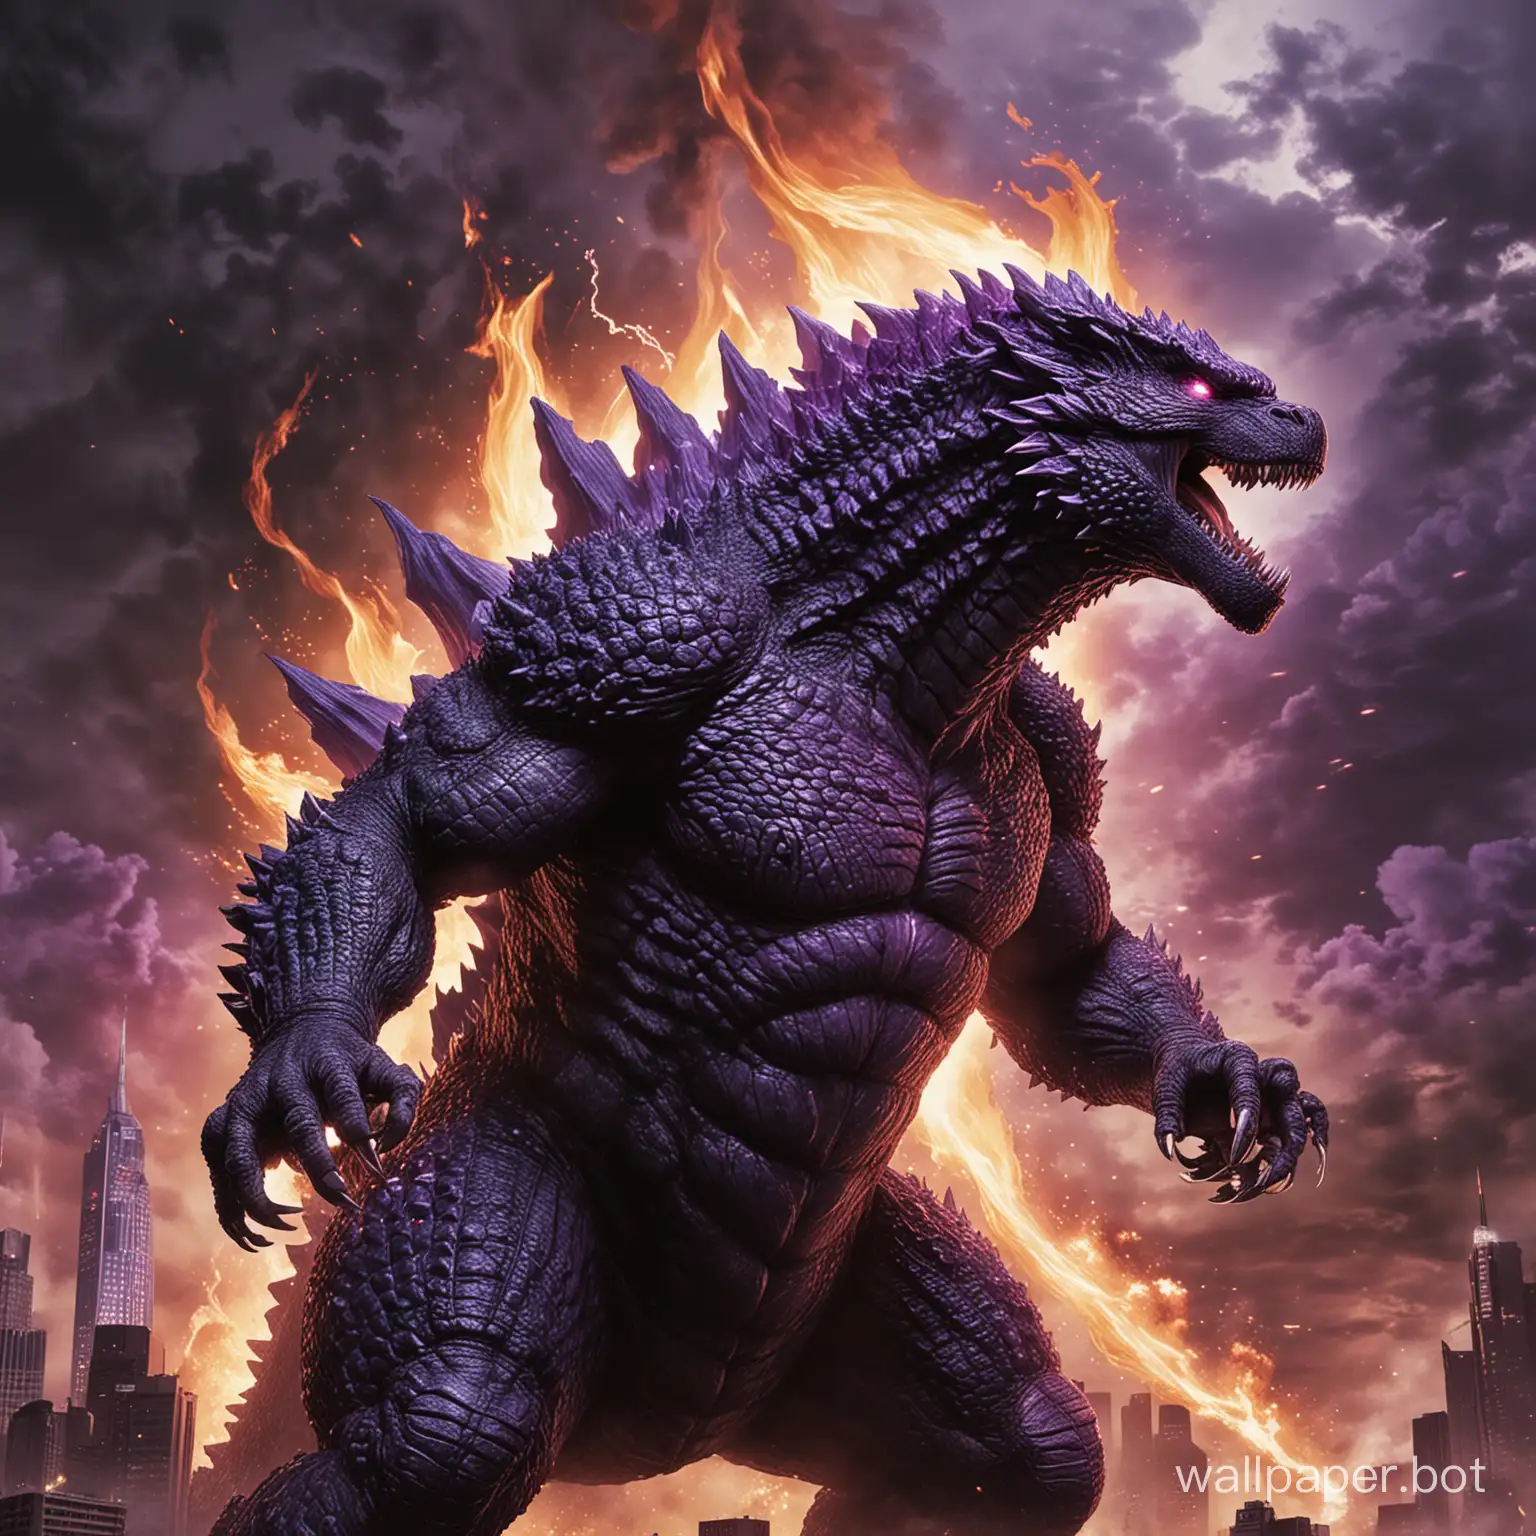 Mighty-Godzilla-Engulfed-in-Intense-Violet-Flames